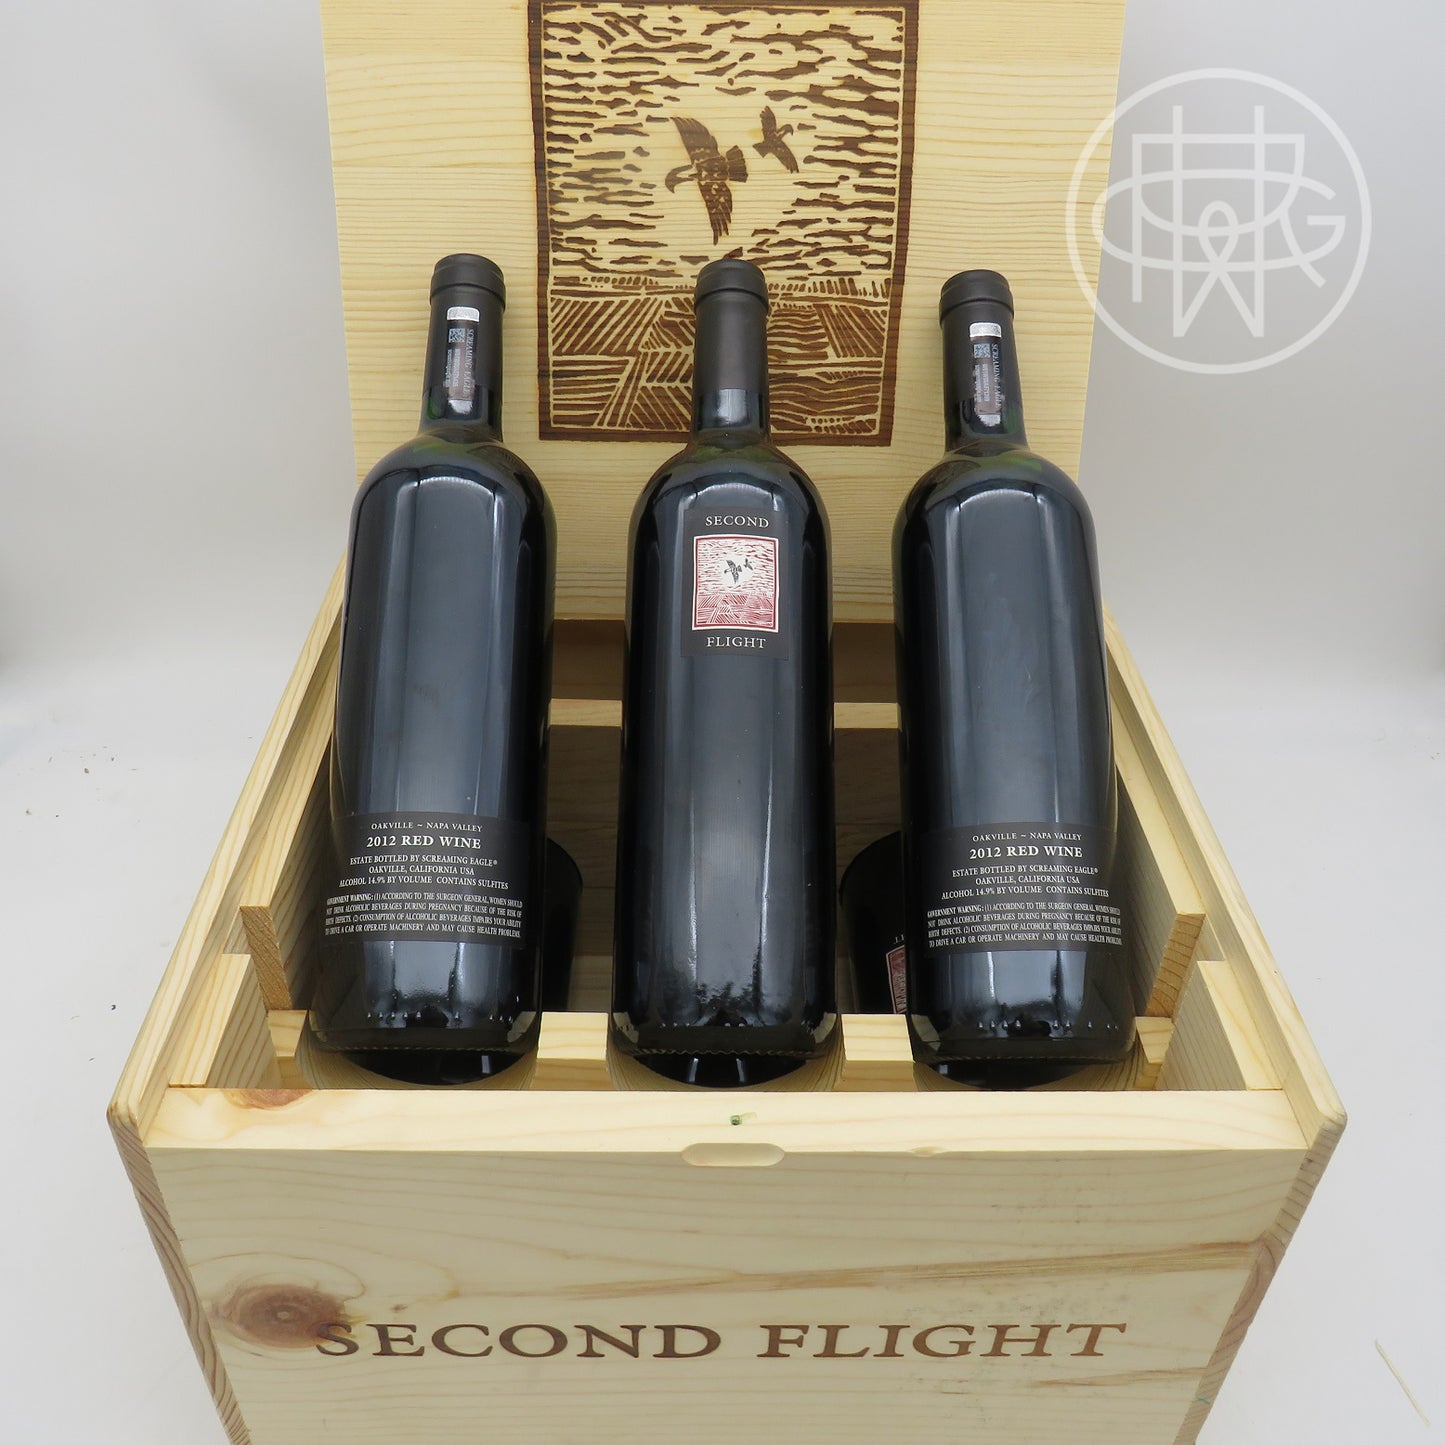 Screaming Eagle Second Flight 2012 6-Pack OWC 750mL